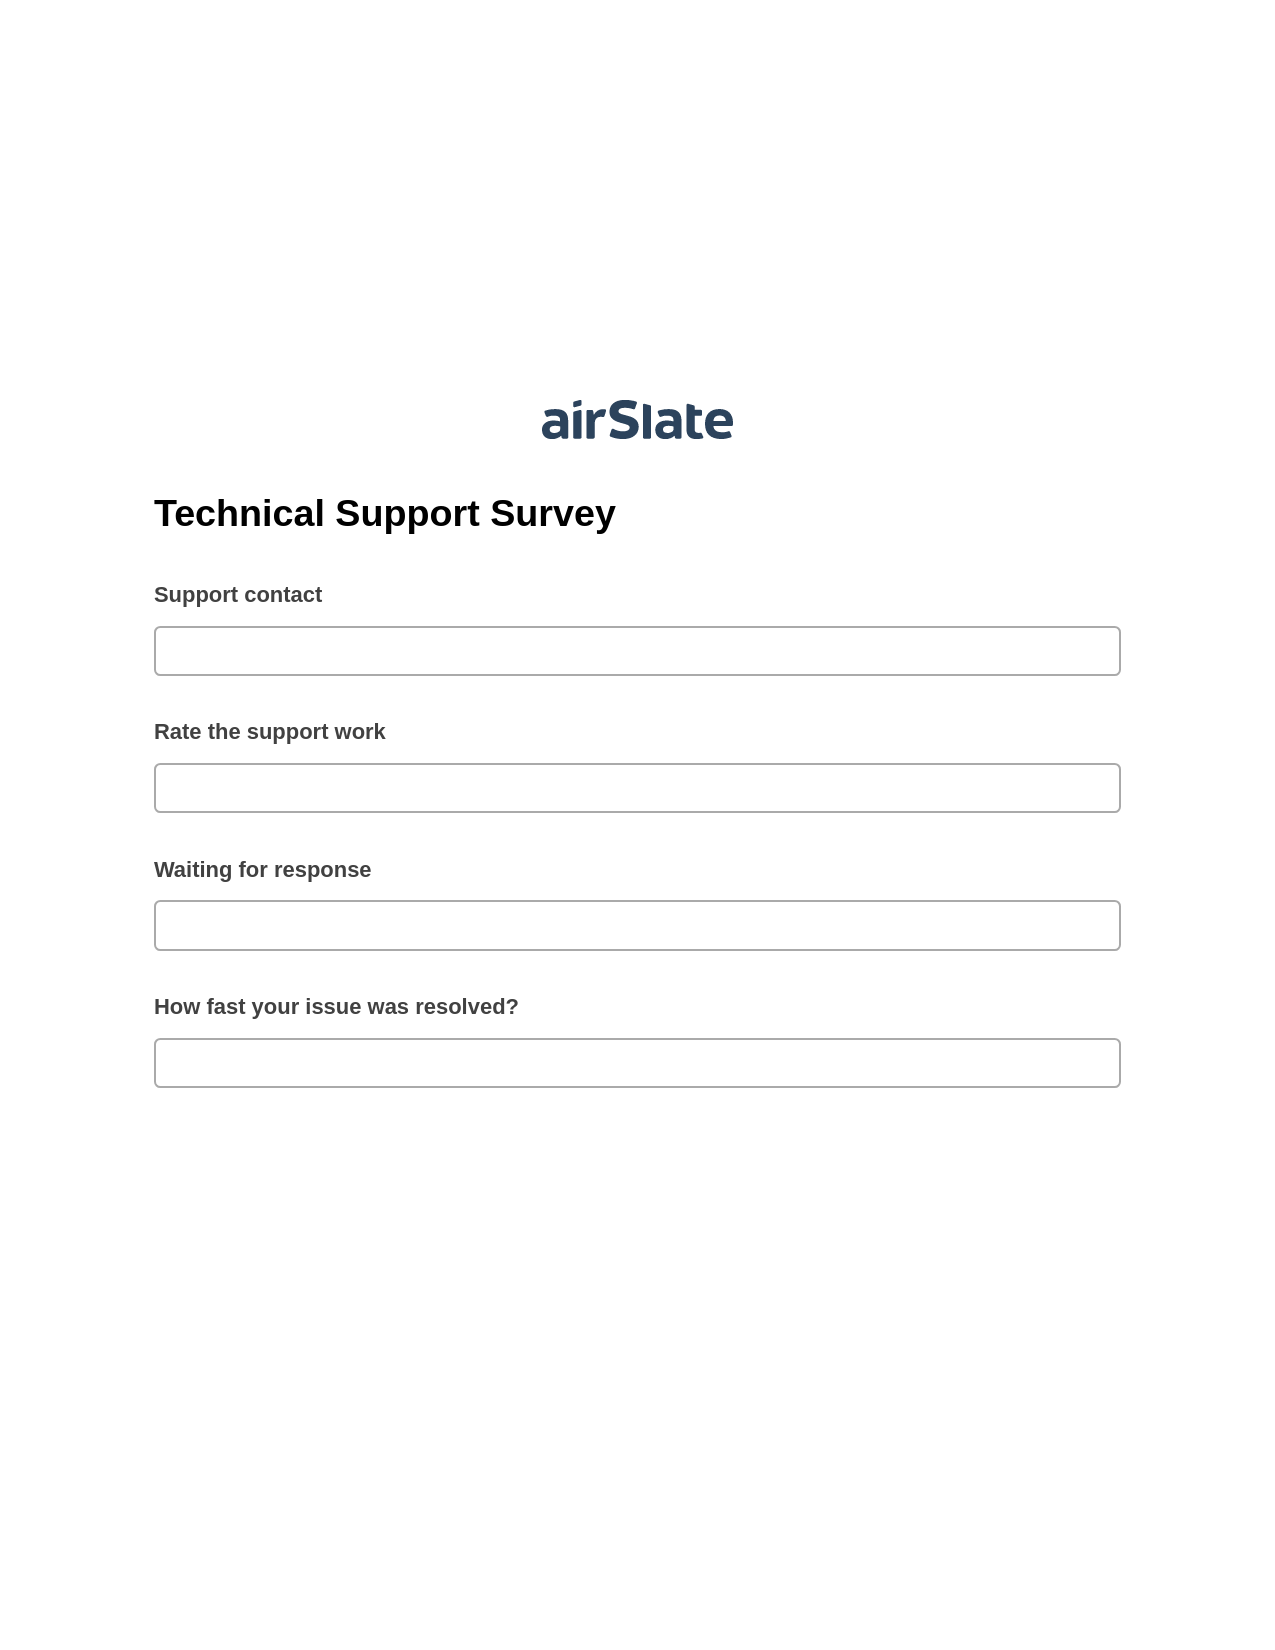 Technical Support Survey Pre-fill from CSV File Bot, Roles Reminder Bot, Archive to Google Drive Bot